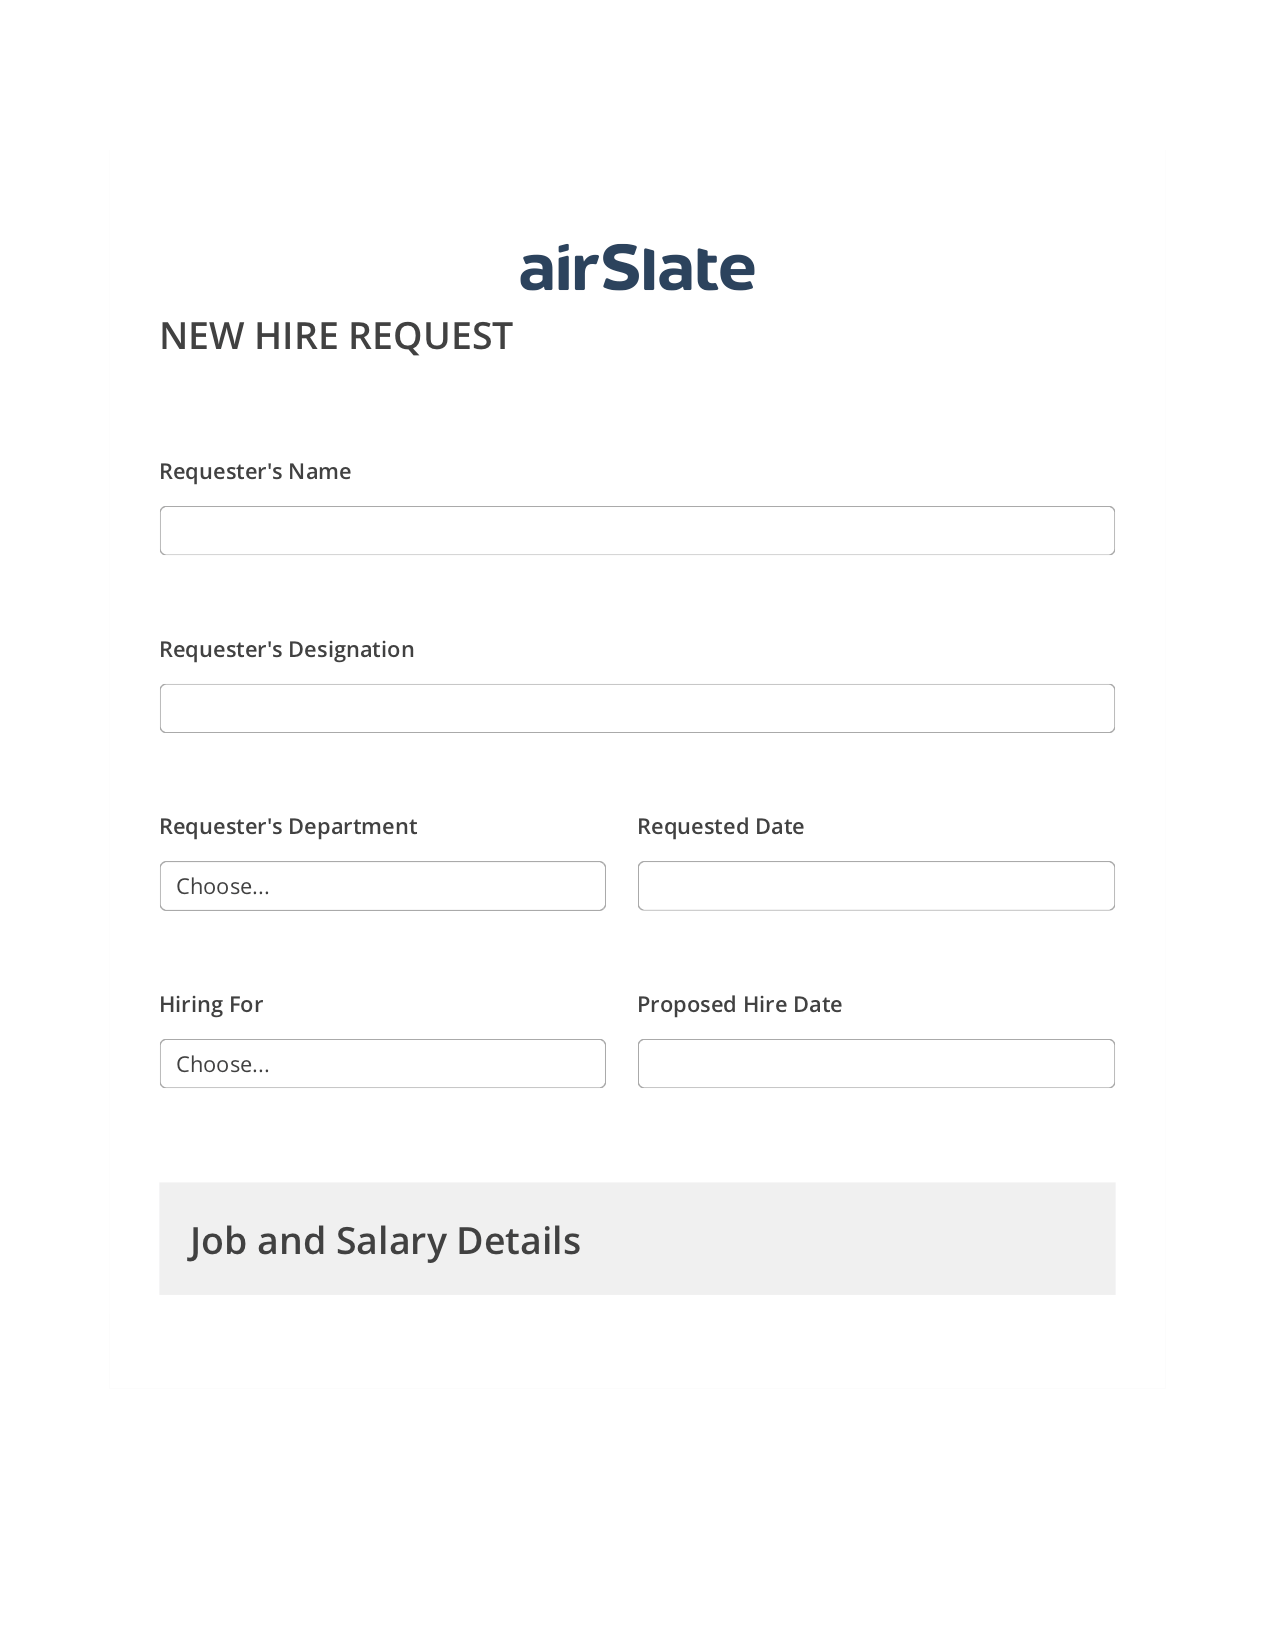 Hiring Request Workflow Pre-fill from Smartsheet Bot, Lock the Slate Bot, Export to WebMerge Bot